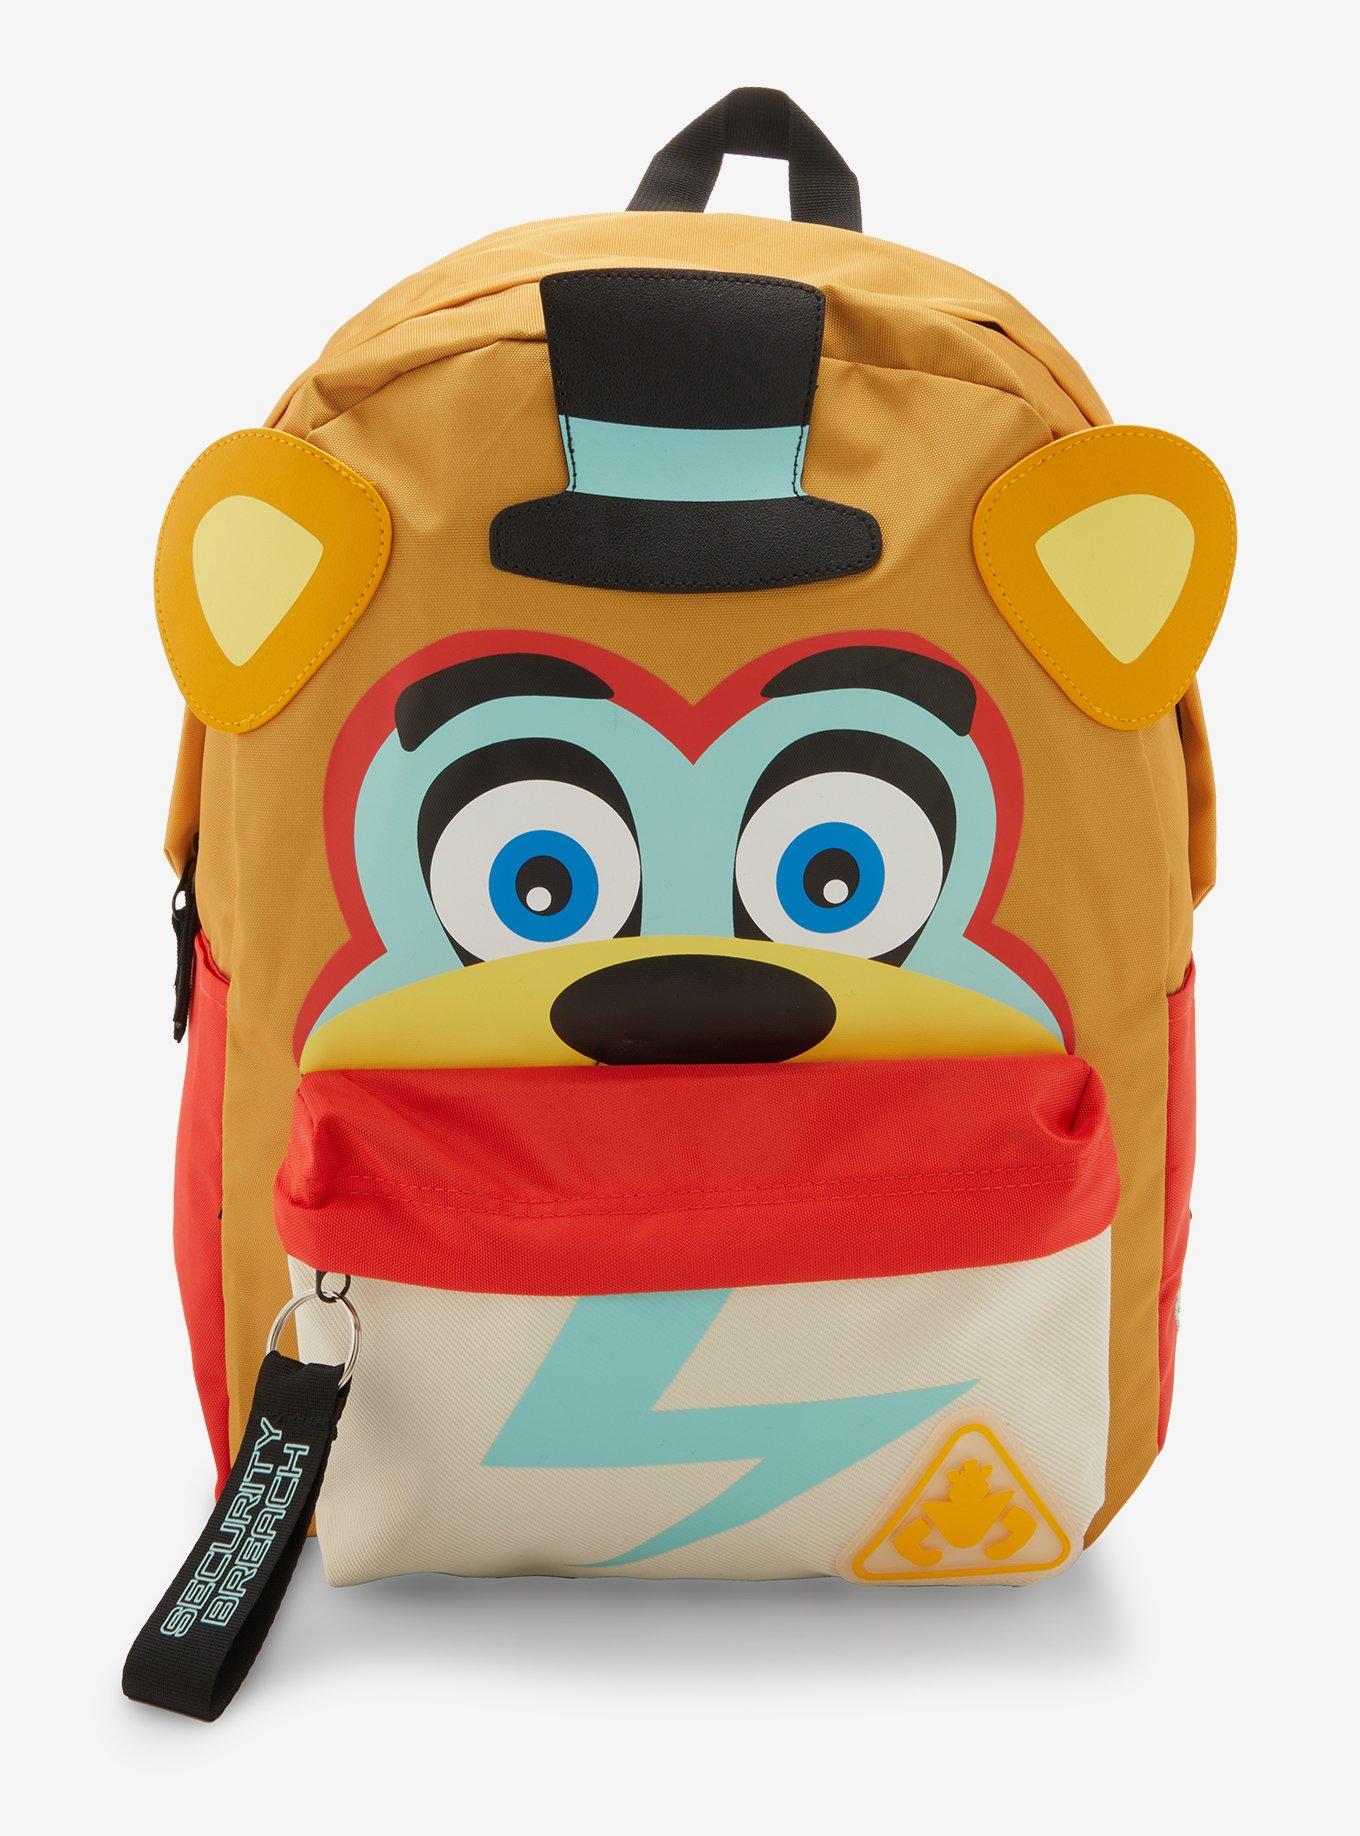 Five Nights At Freddy's: Security Breach Glamrock Freddy Backpack, , hi-res